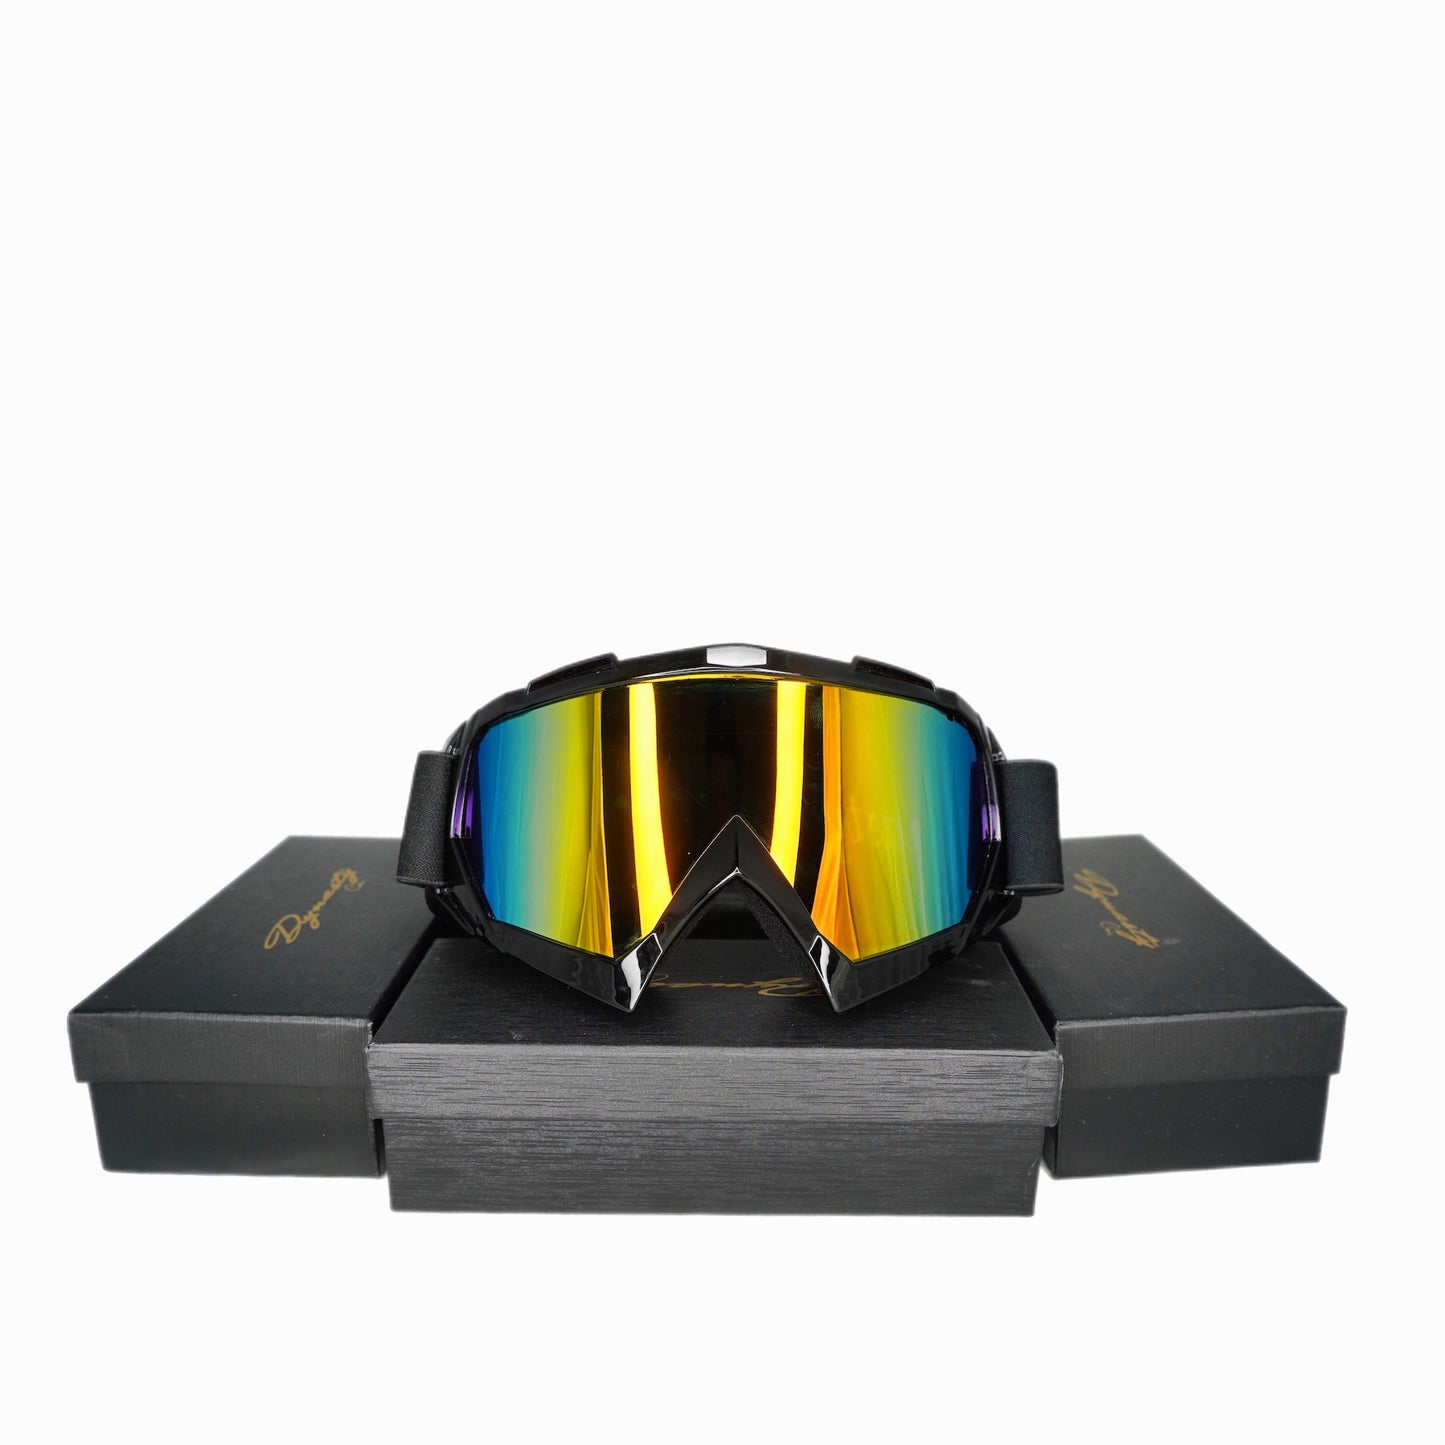 DYNASTY Goggles (Green Tint)